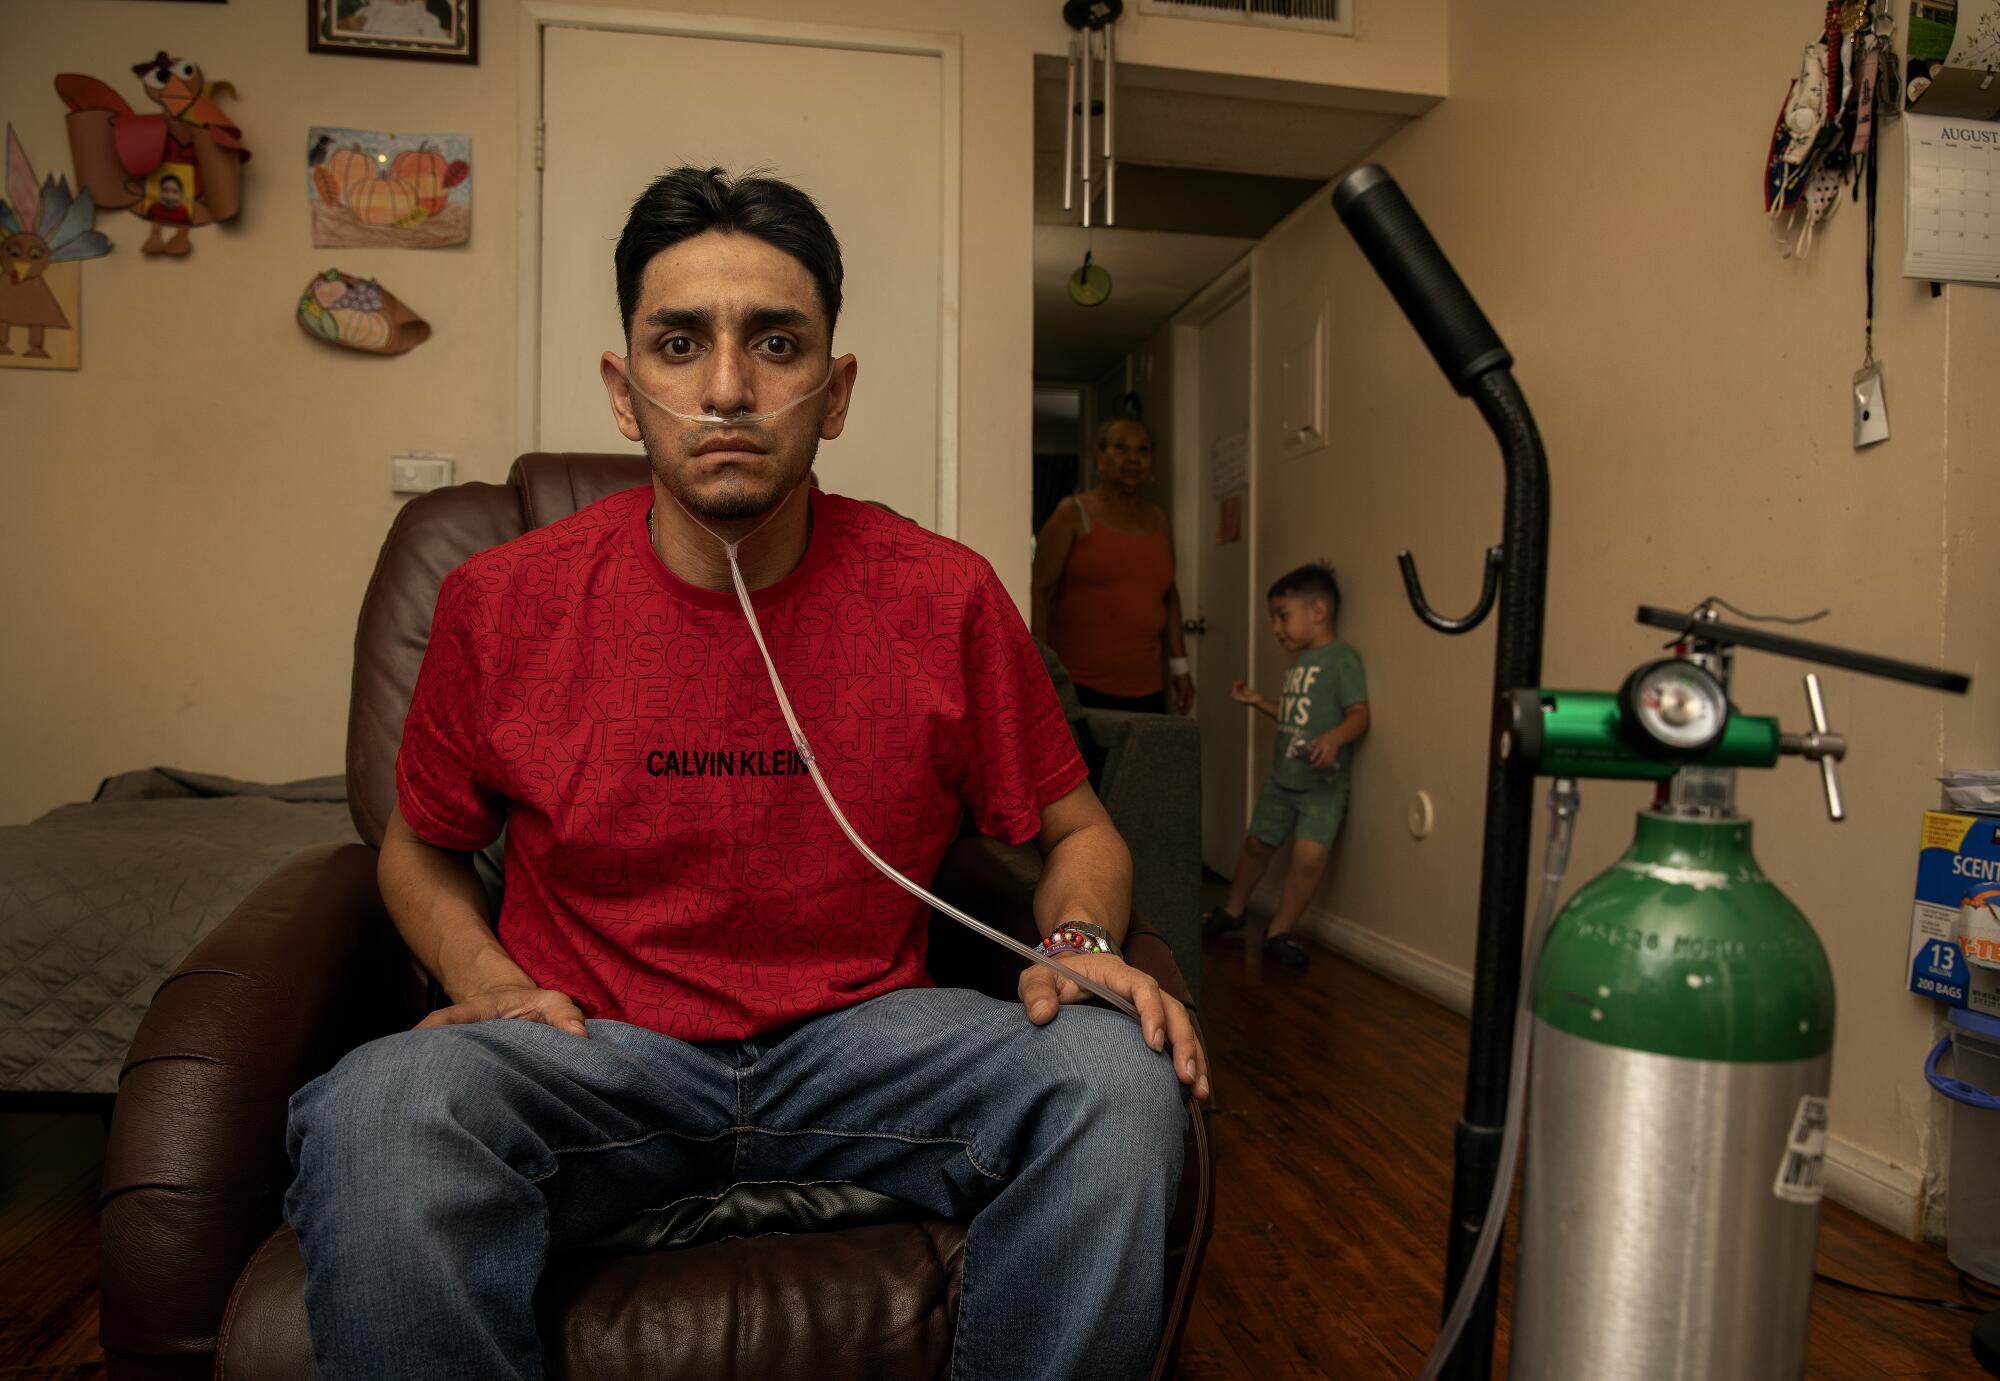 Leobardo Segura Meza, who suffers from silicosis, is photographed in his Pacoima home.